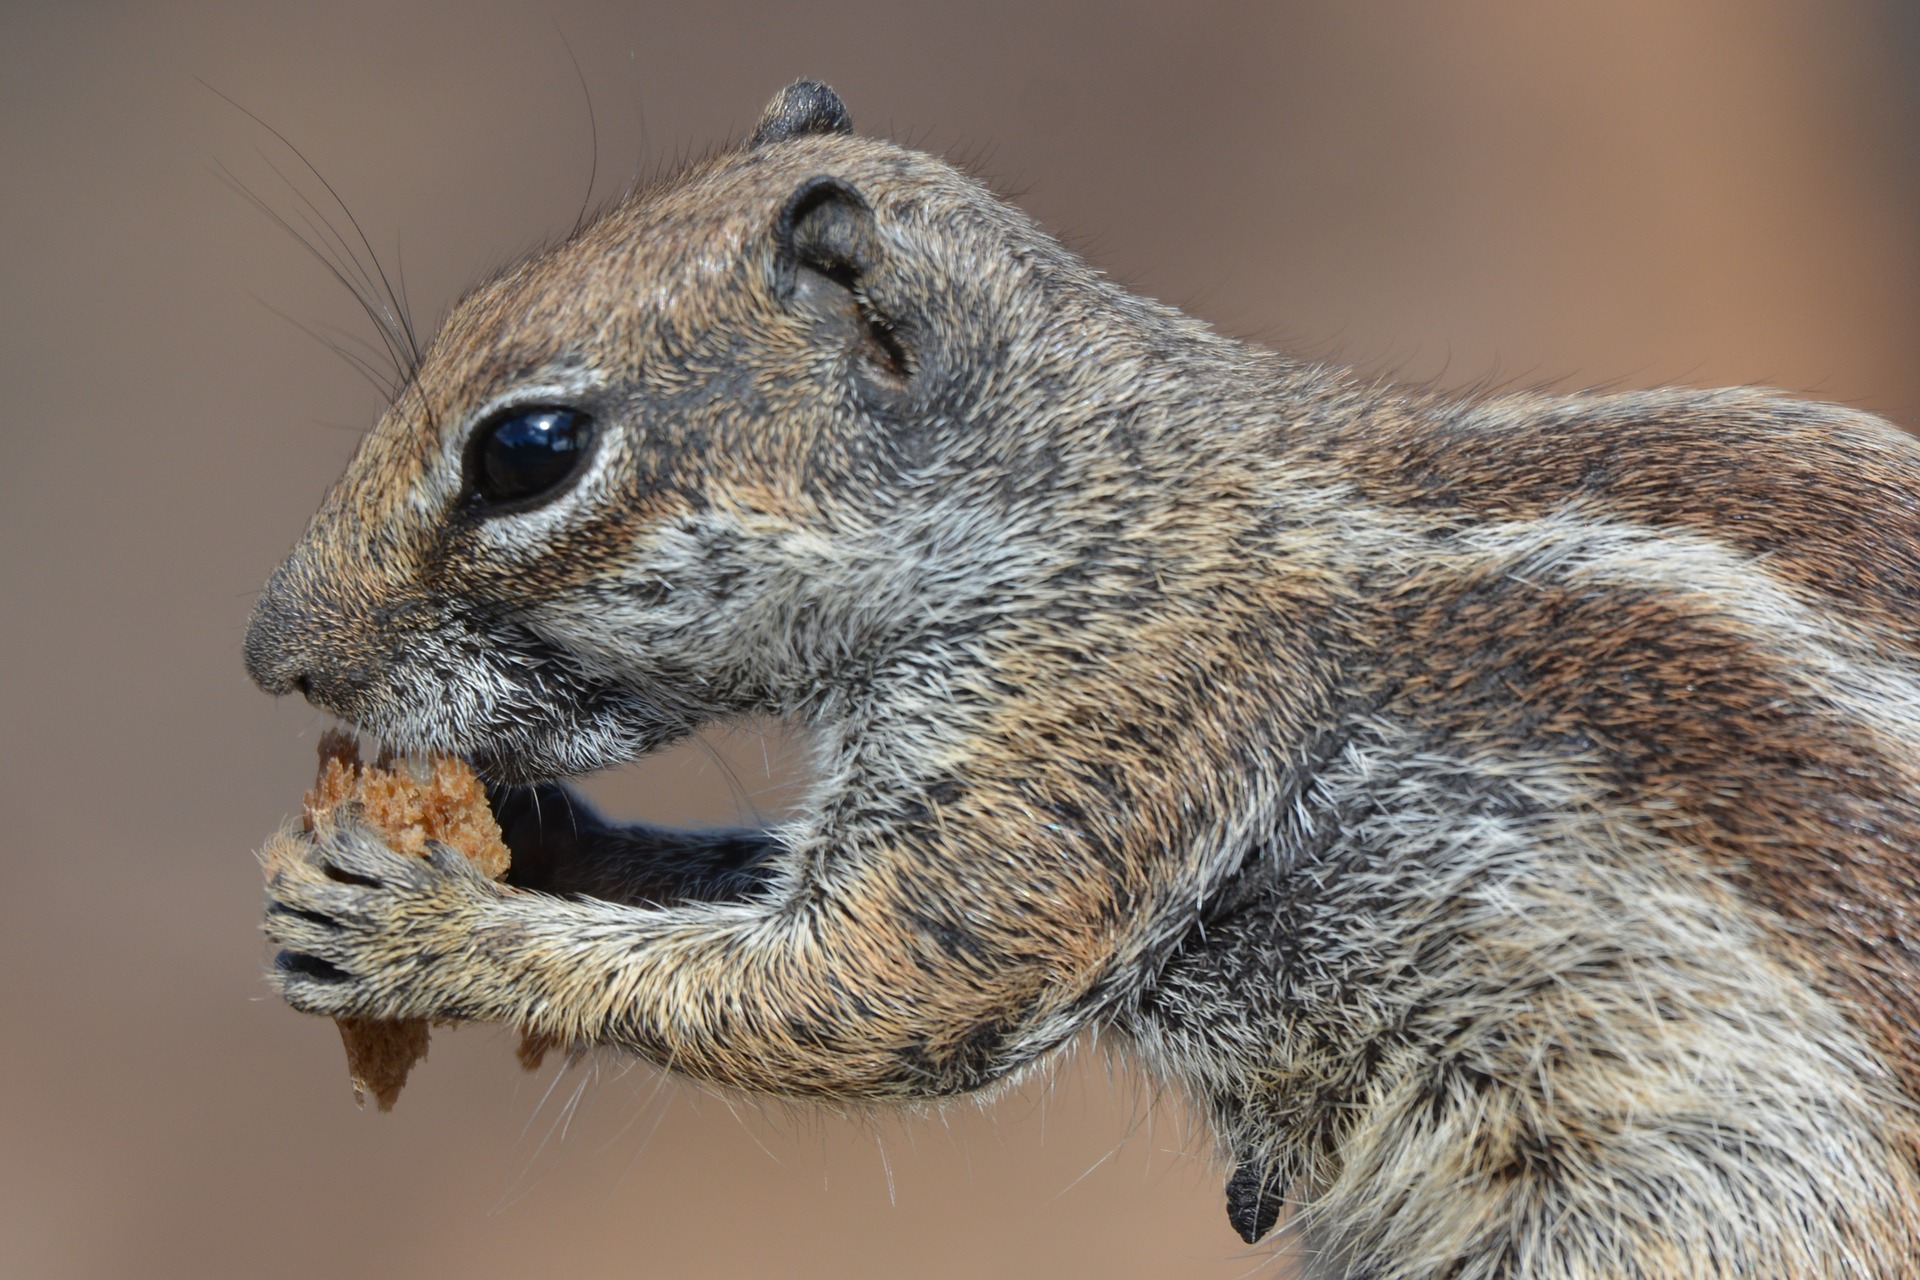 Learning From Squirrels: Three Traits to Embody - Shameless Pride